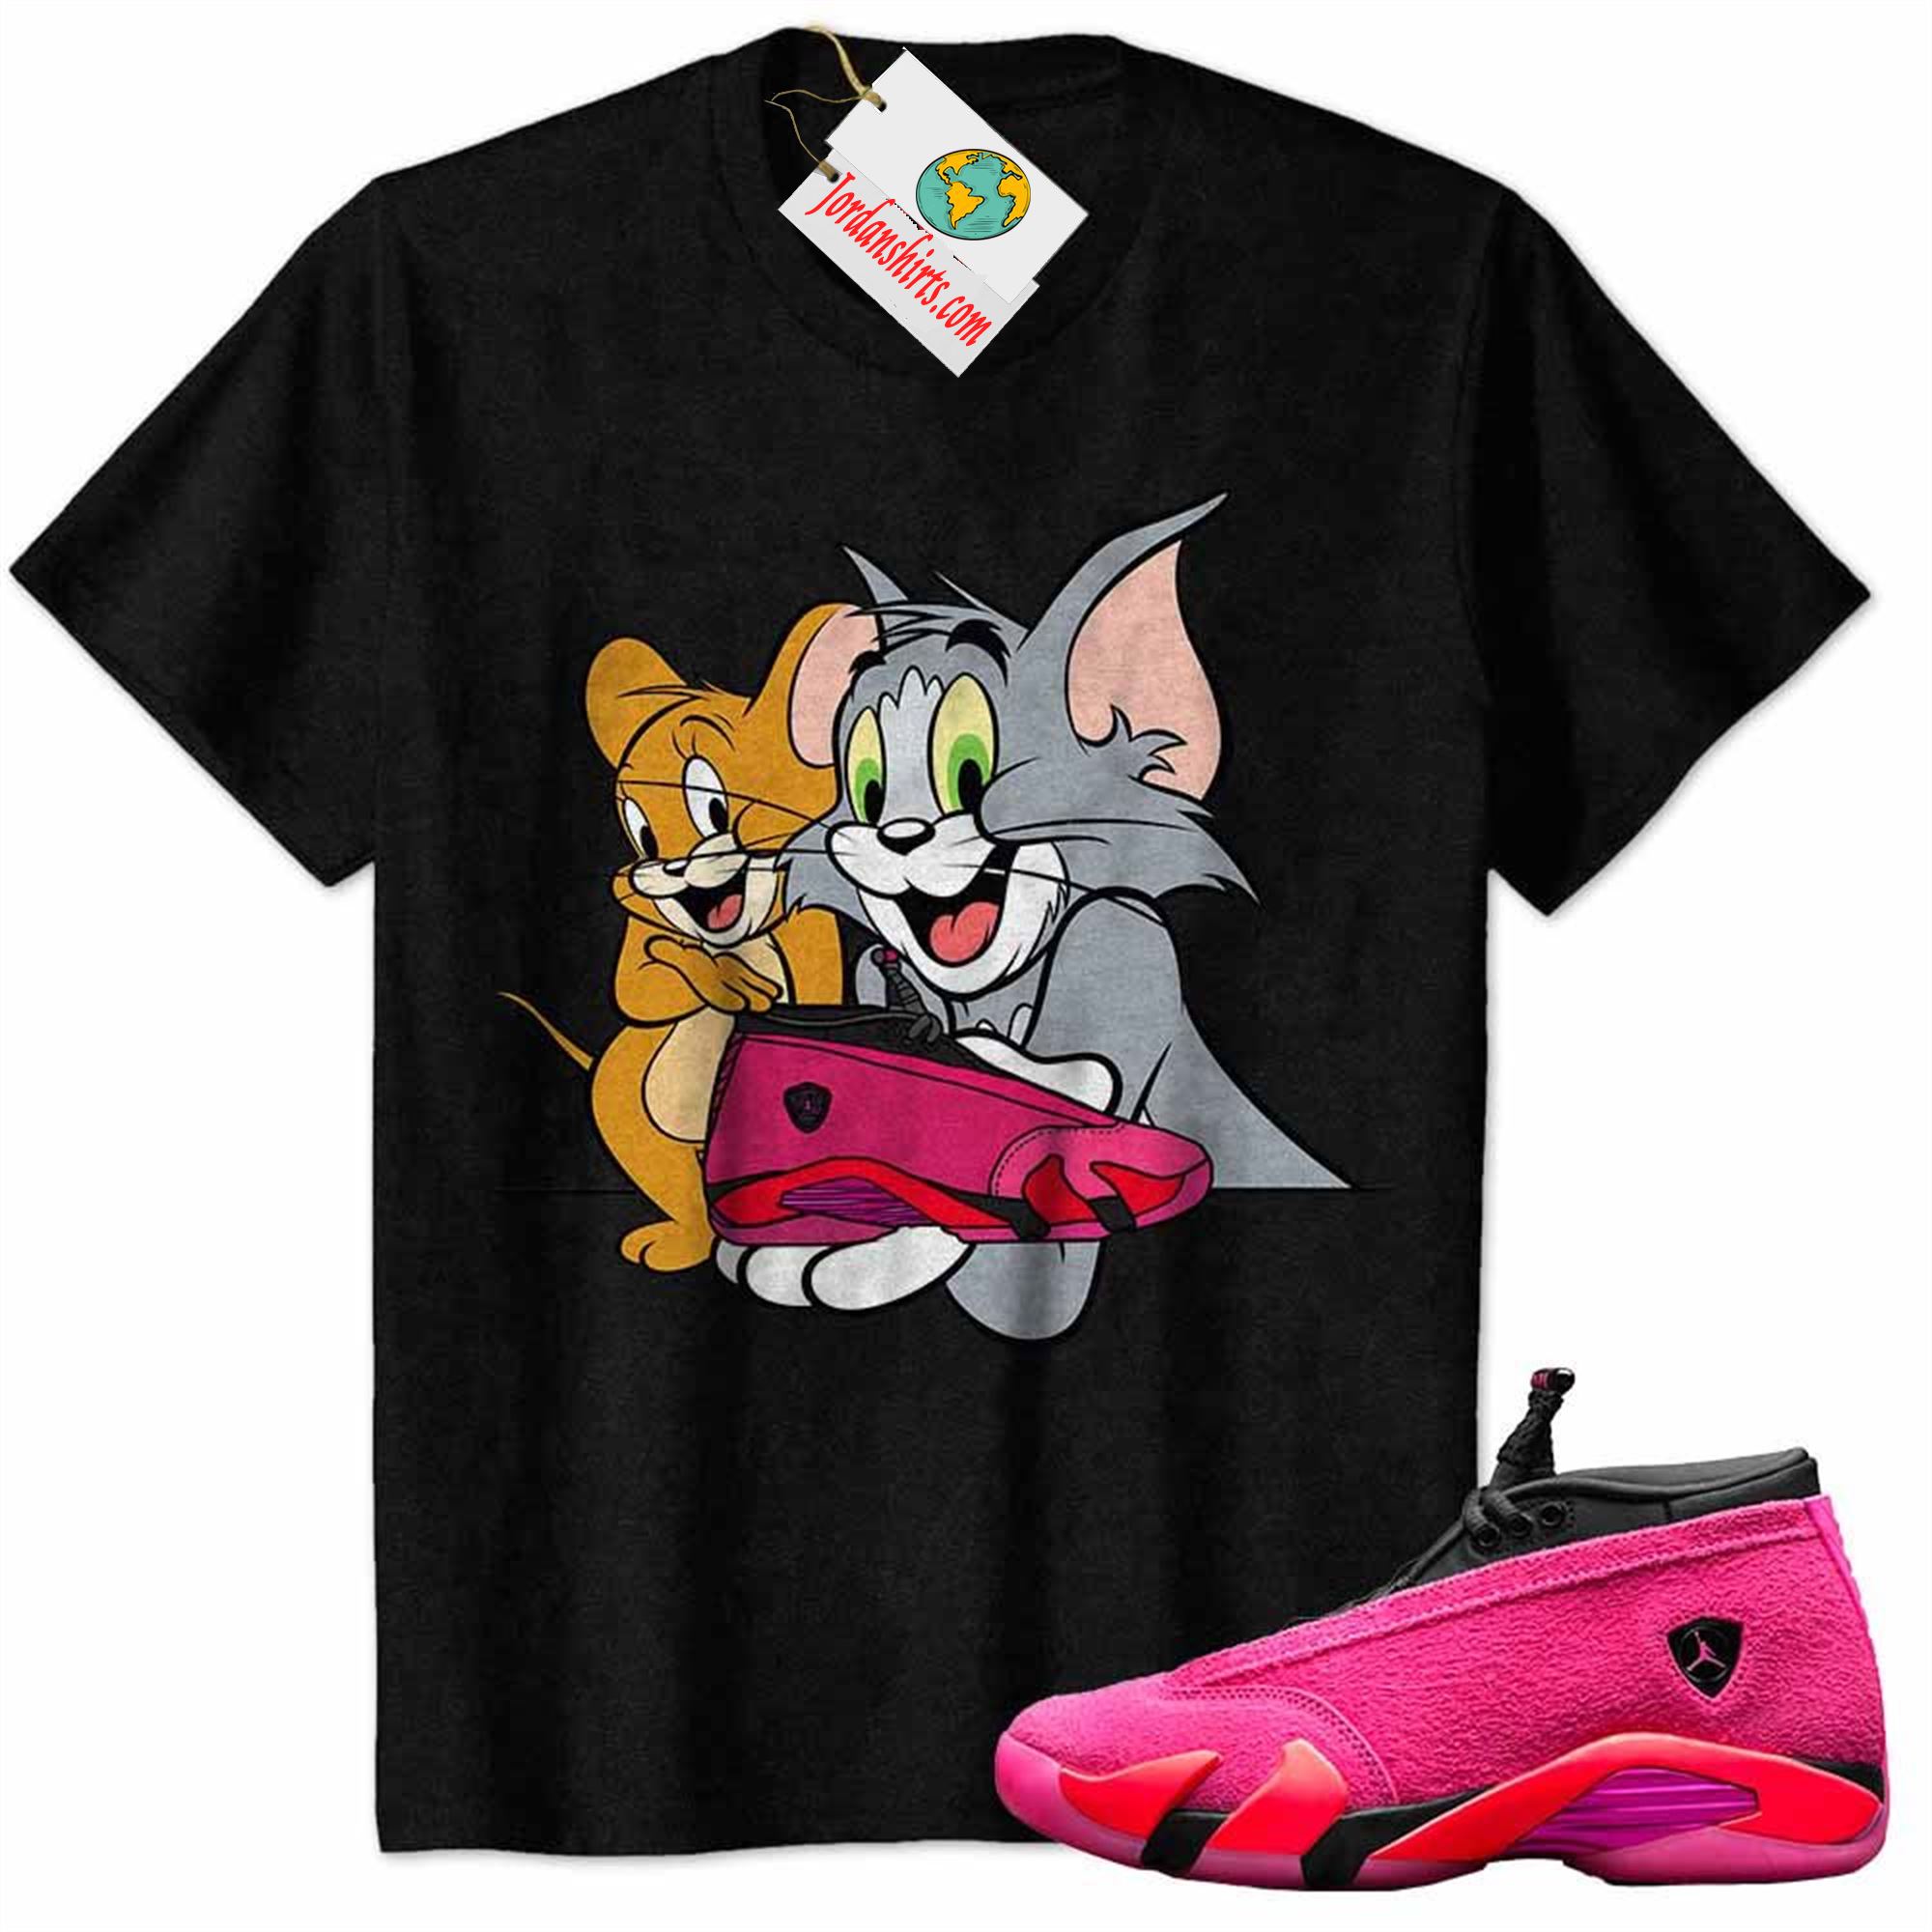 Jordan 14 Shirt, Tom And Jerry Shoes In Hand Black Air Jordan 14 Wmns Shocking Pink 14s Plus Size Up To 5xl